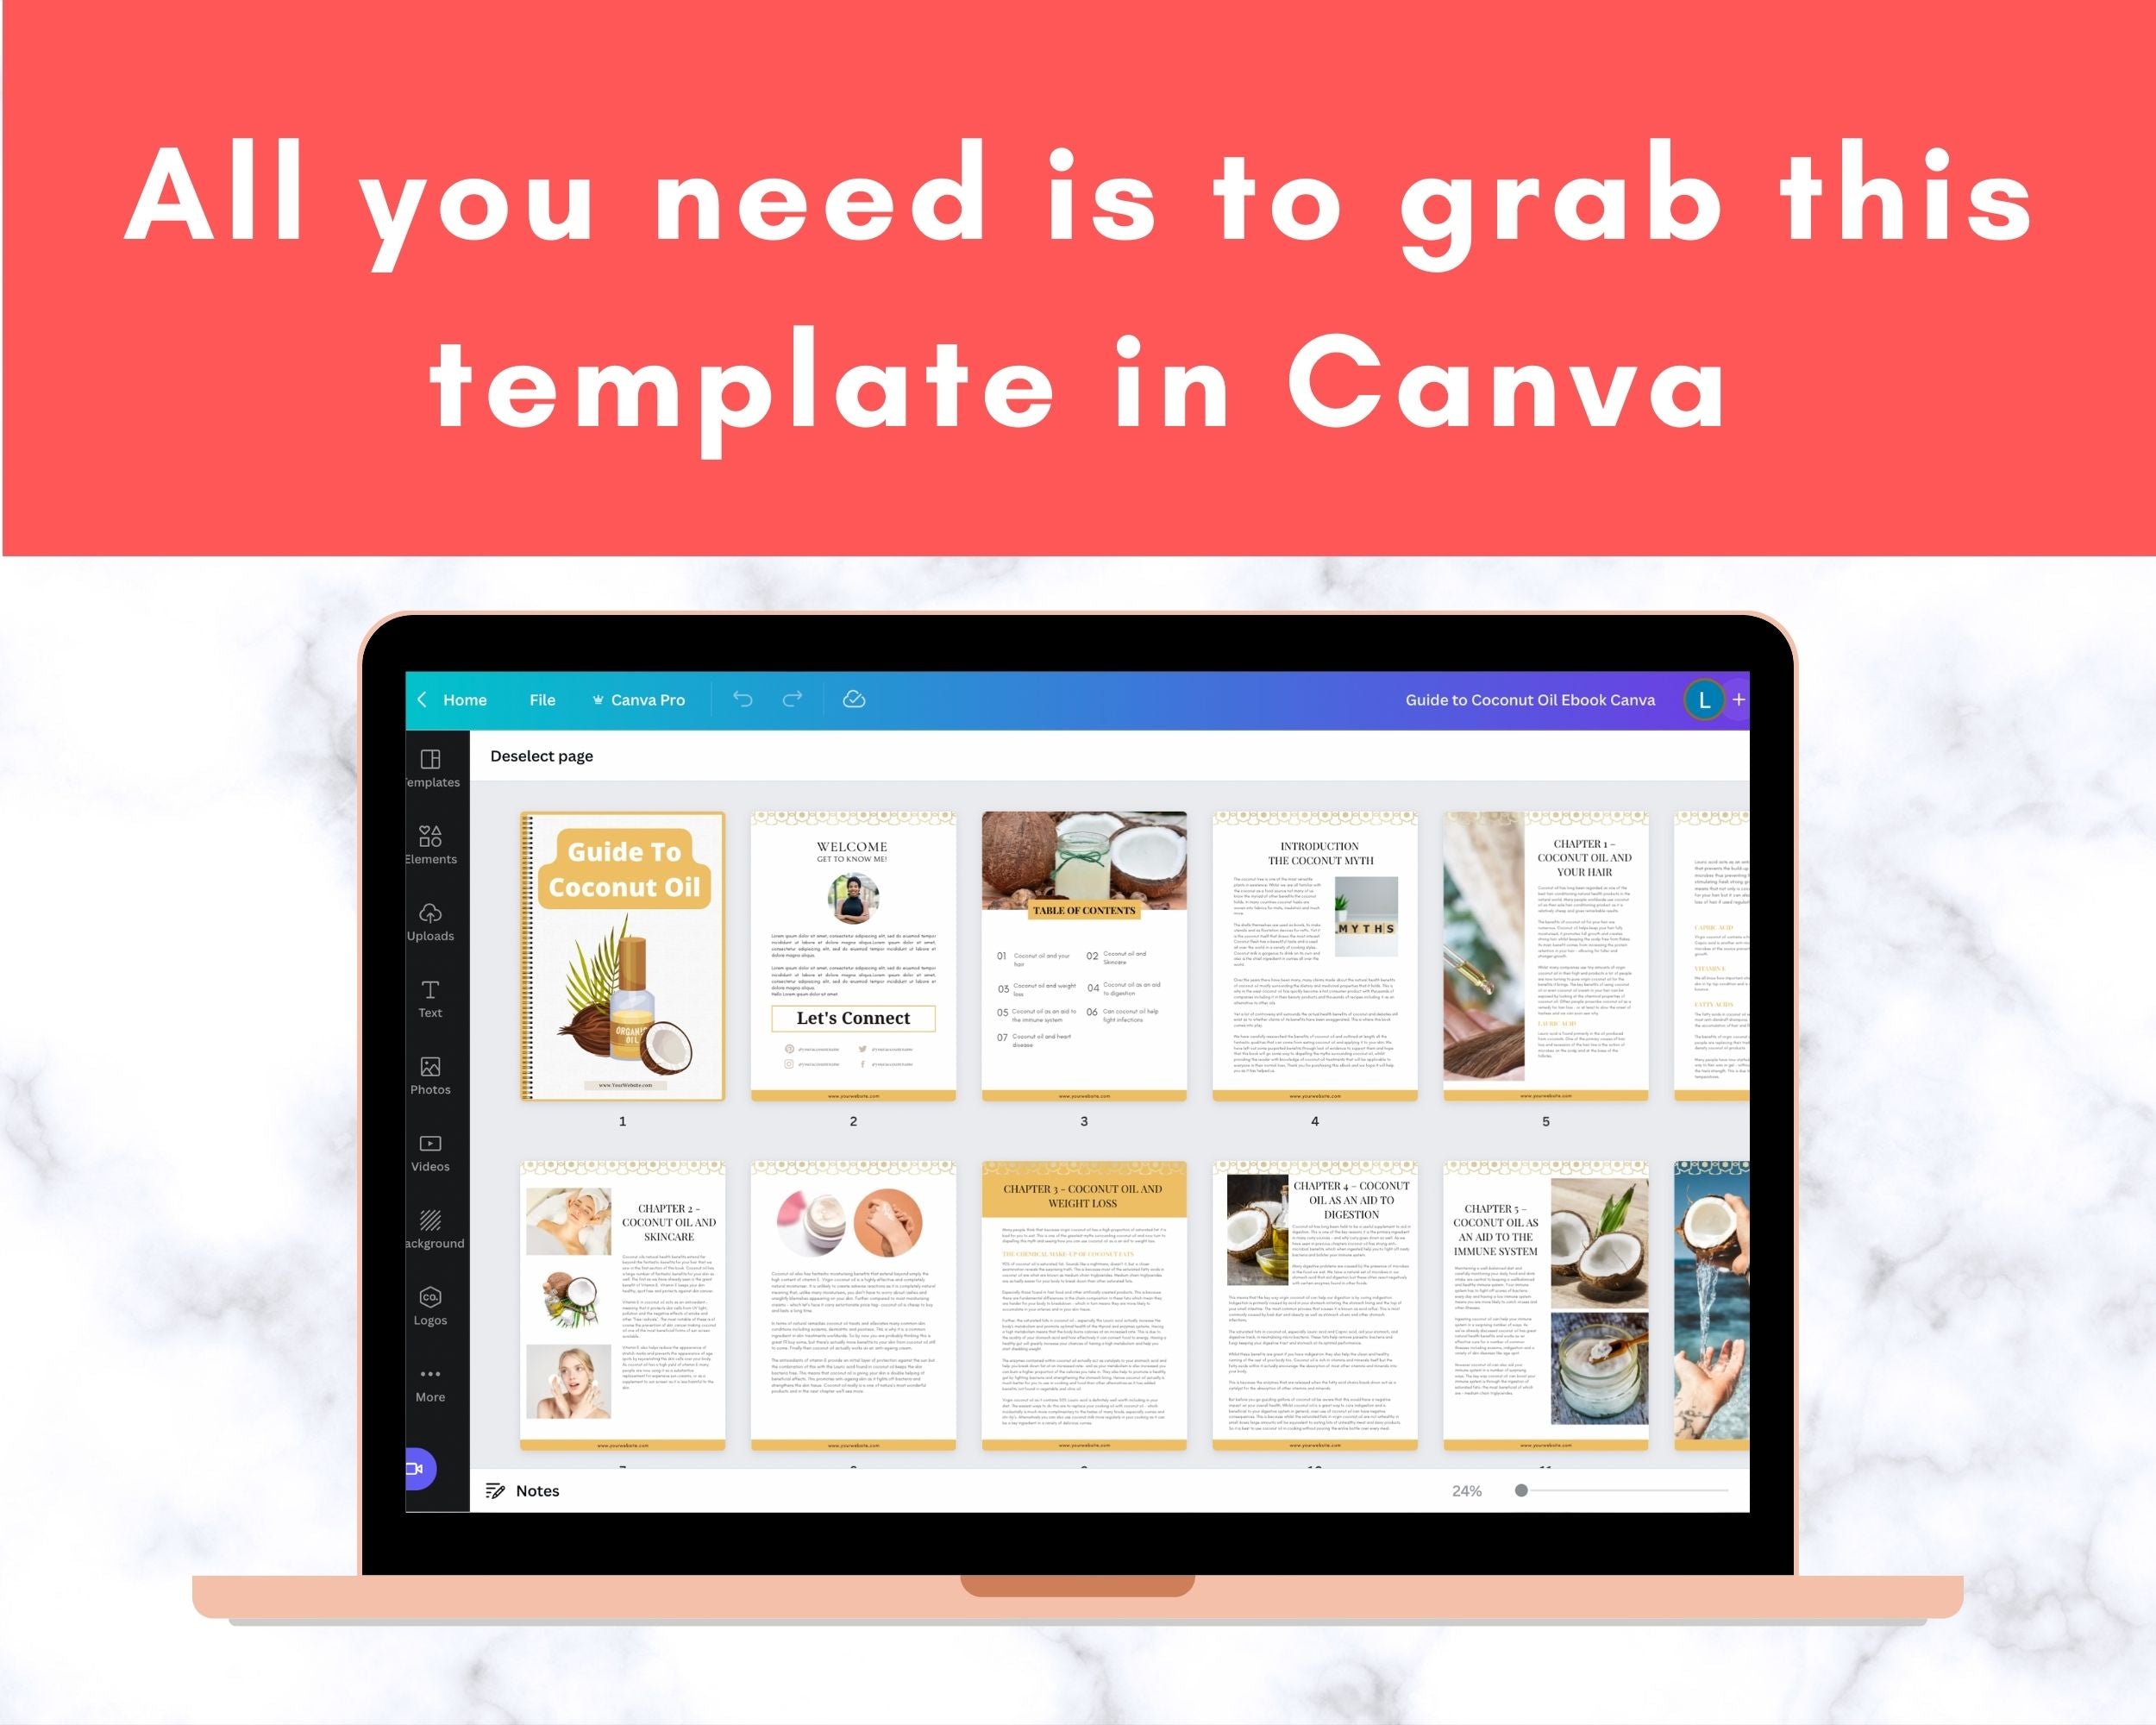 Editable Guide To Coconut Oil Ebook | Done-for-You Ebook in Canva | Rebrandable and Resizable Canva Template